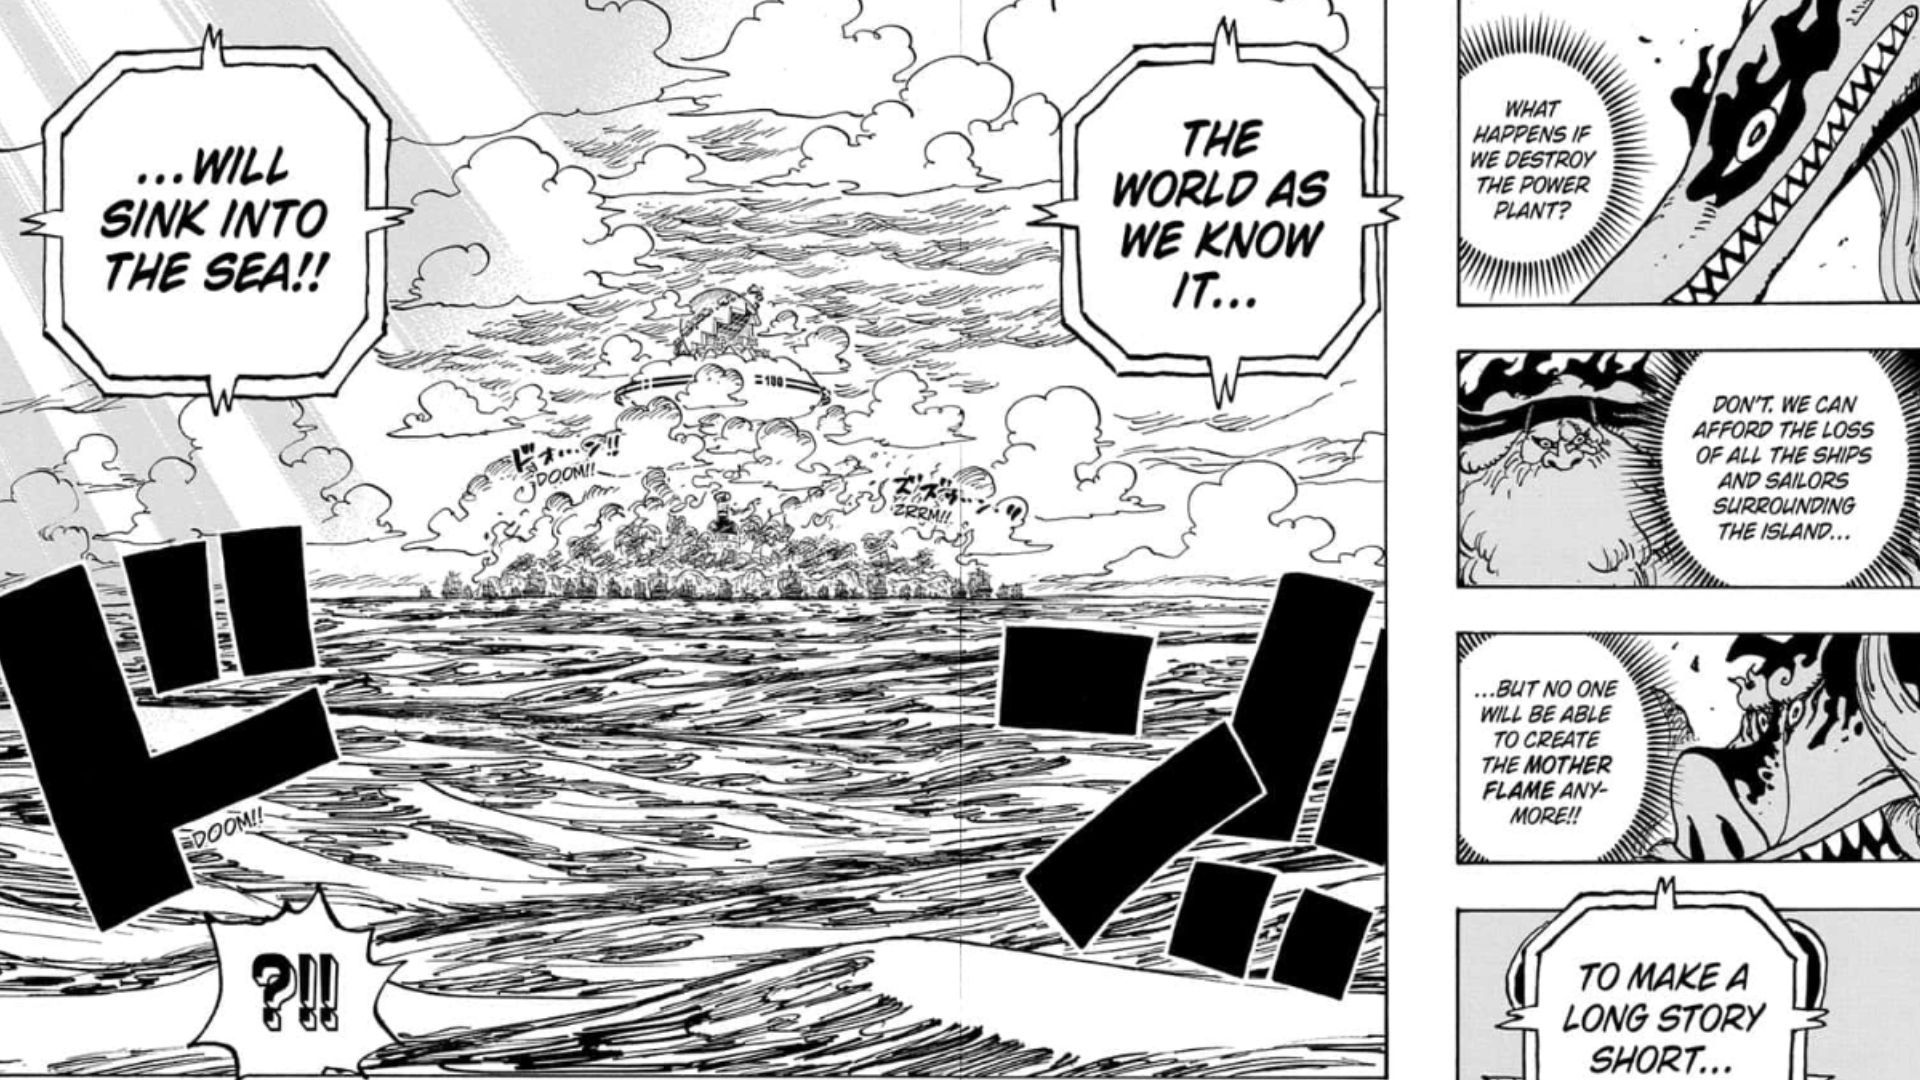 One Piece Confirms One of the Biggest Theory About The Final Treasure